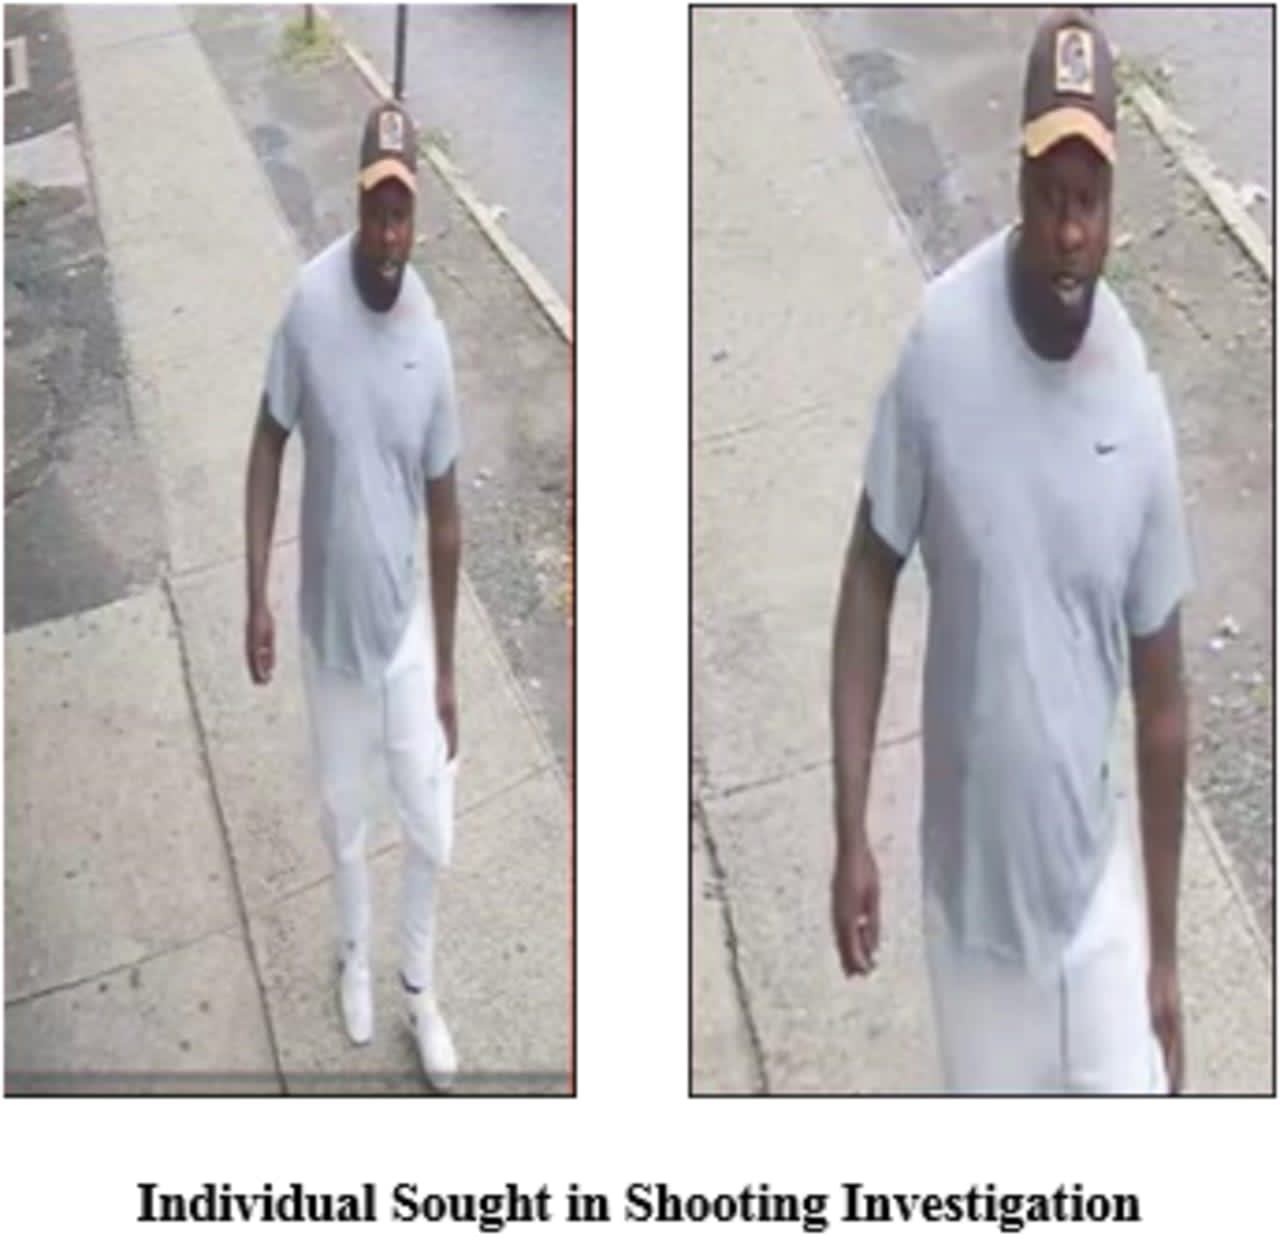 Police are seeking the public's help identifying a man wanted in a Newark shooting investigation.